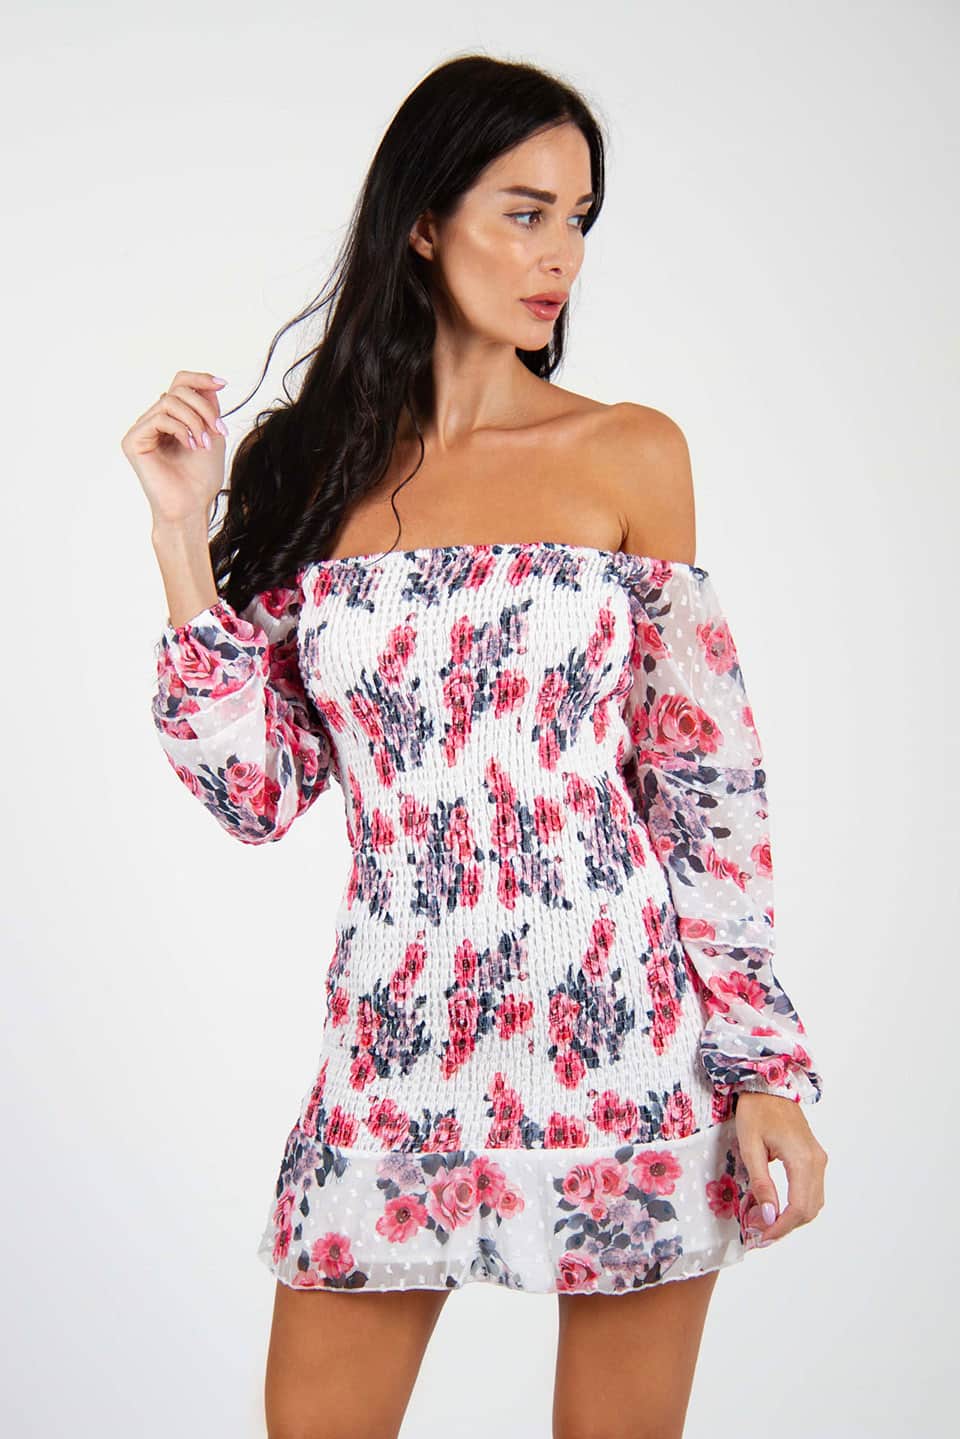 Model wearing off-shoulder floral print bodycon mini dress with long puff sleeves, posing in front view